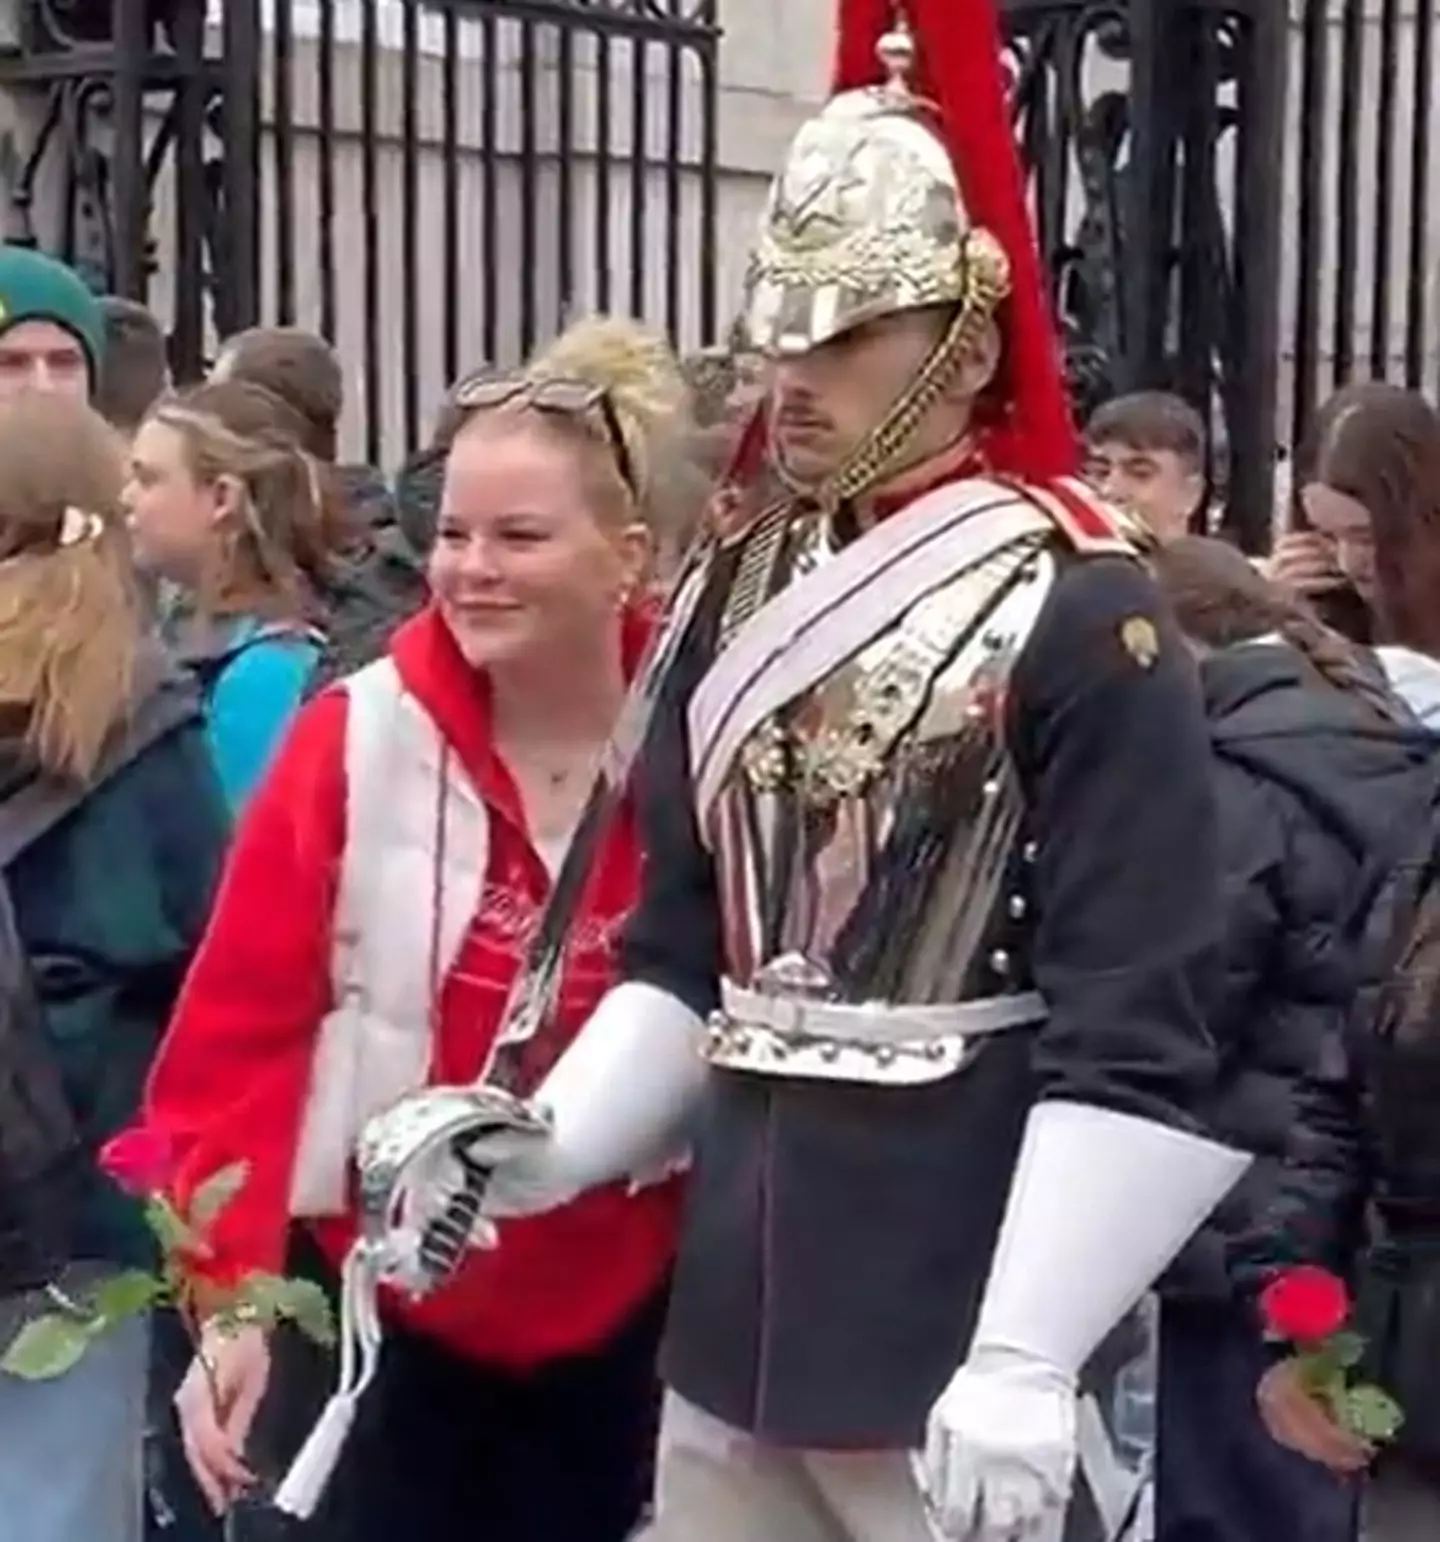 Lots of people try to get pictures with the King's Guards.